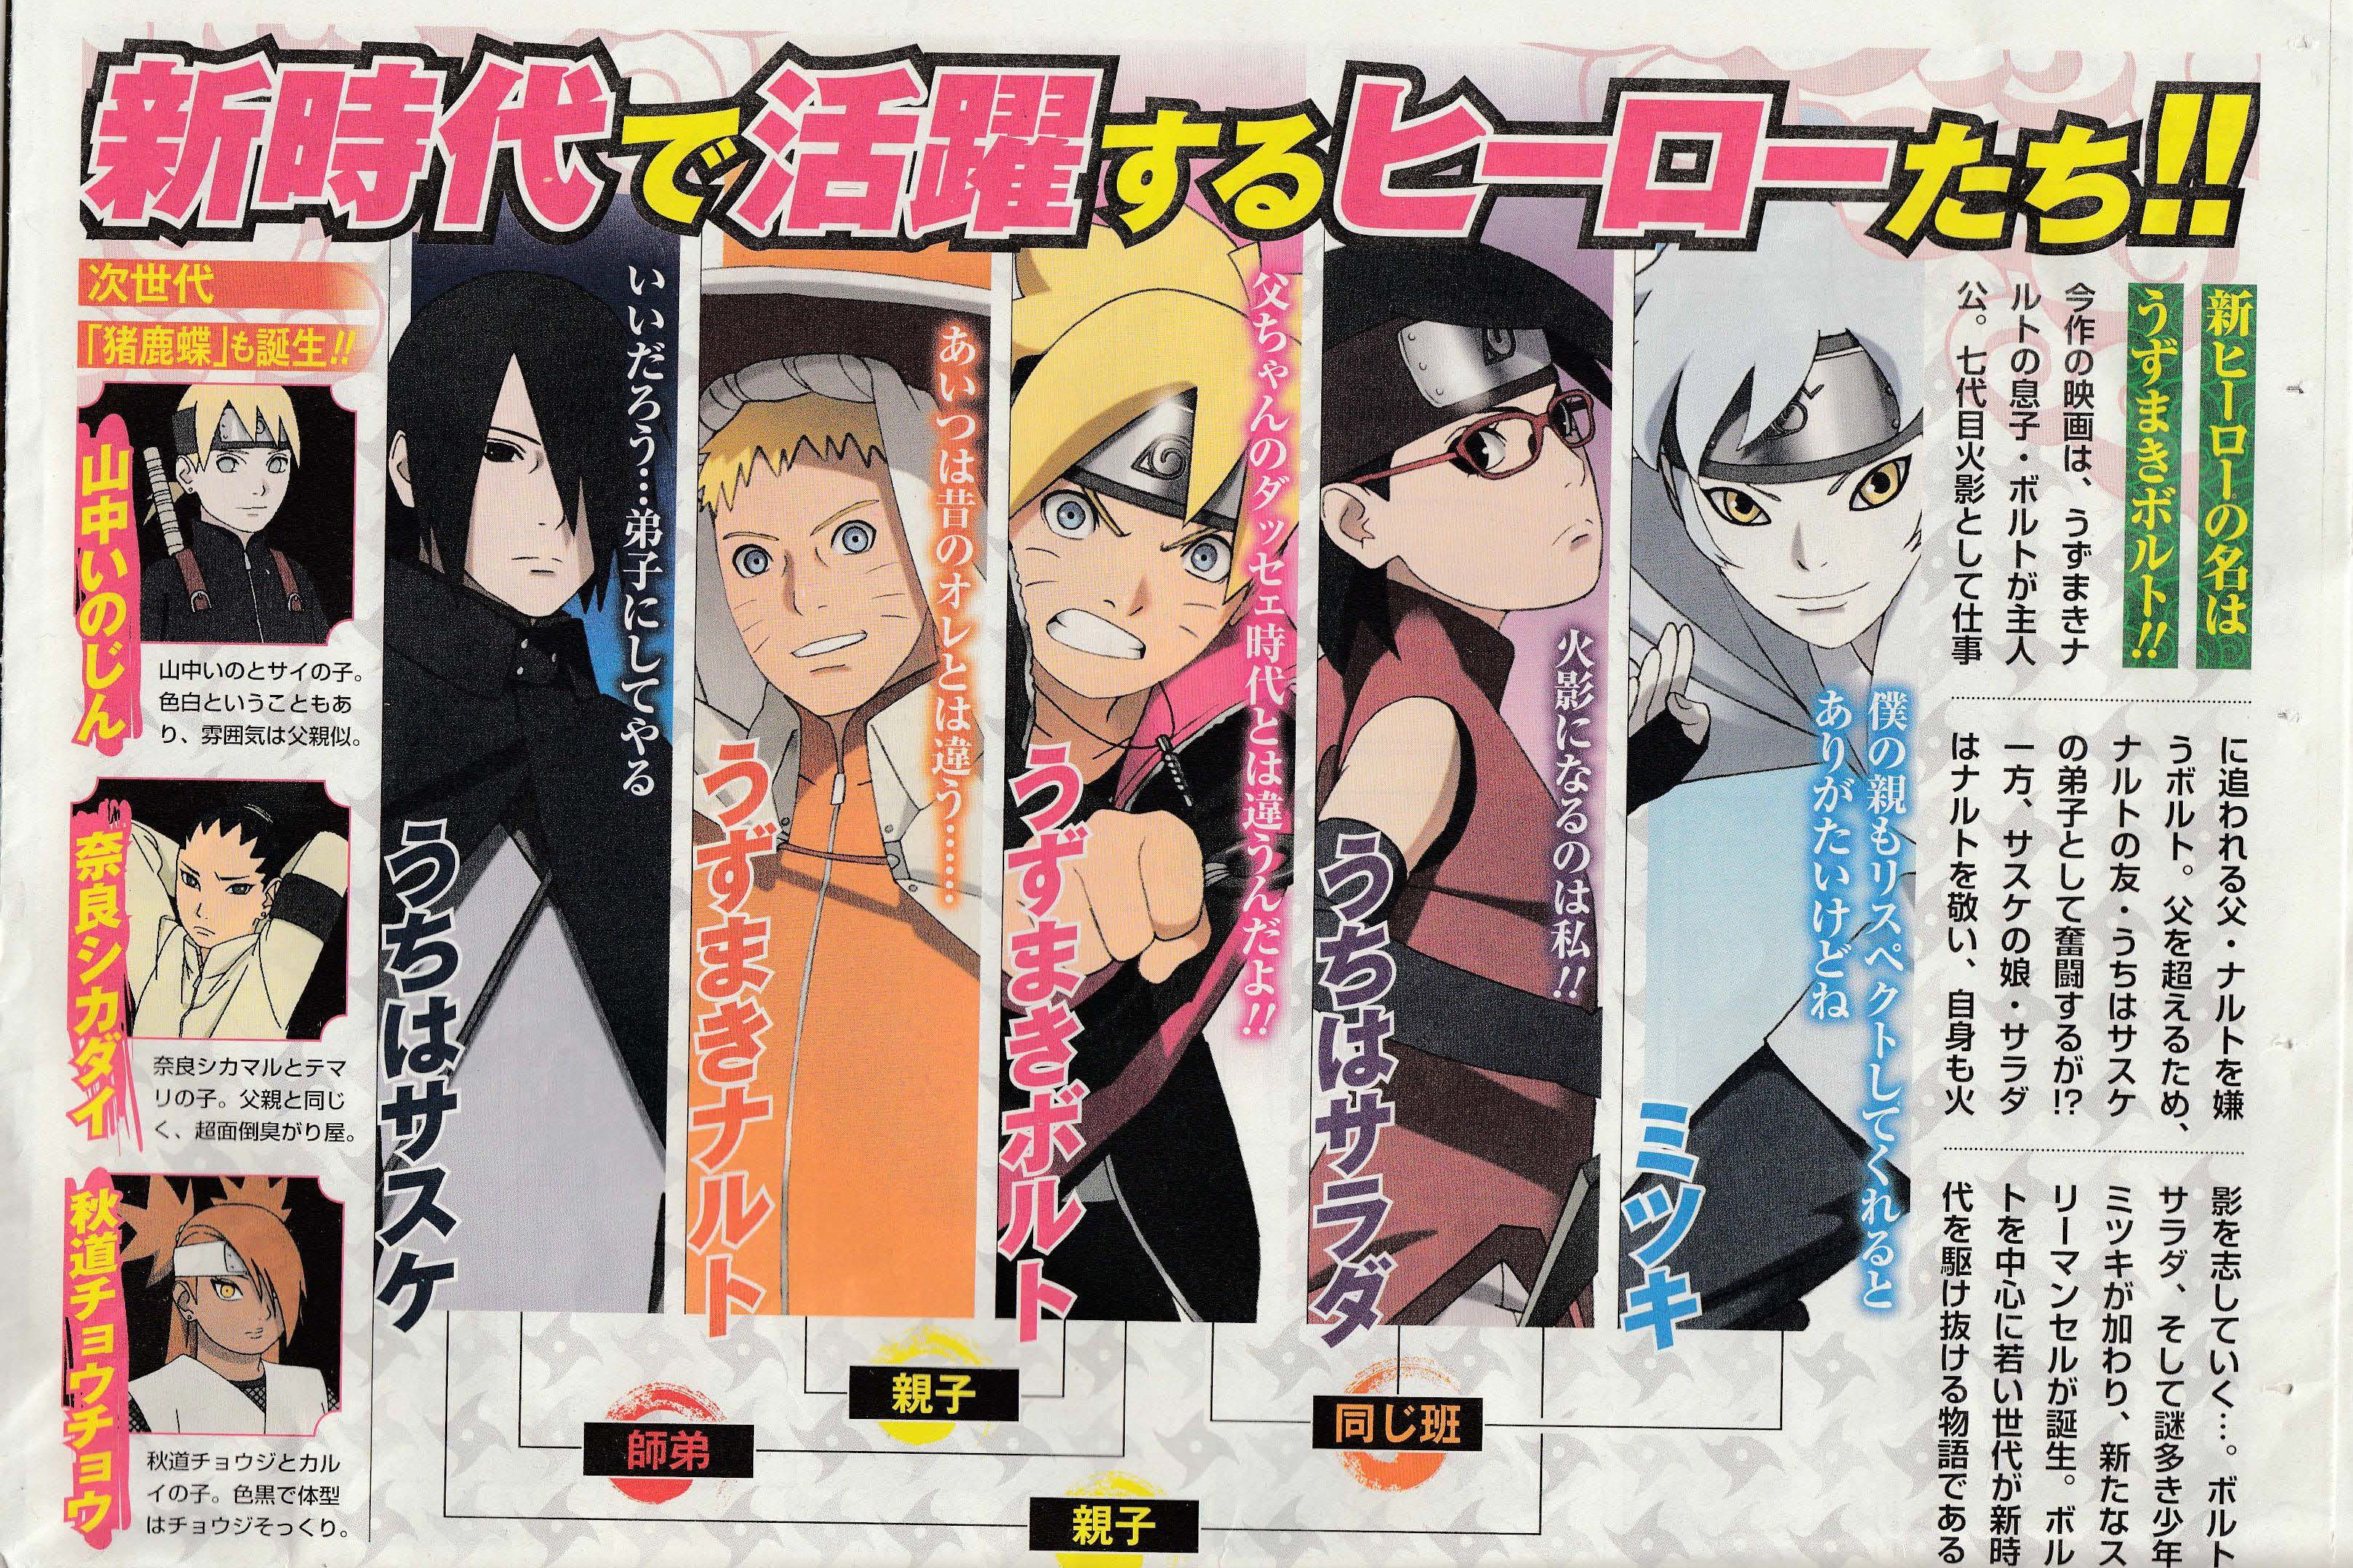 Boruto' Reveals That SPOILER May Not be Dead After All